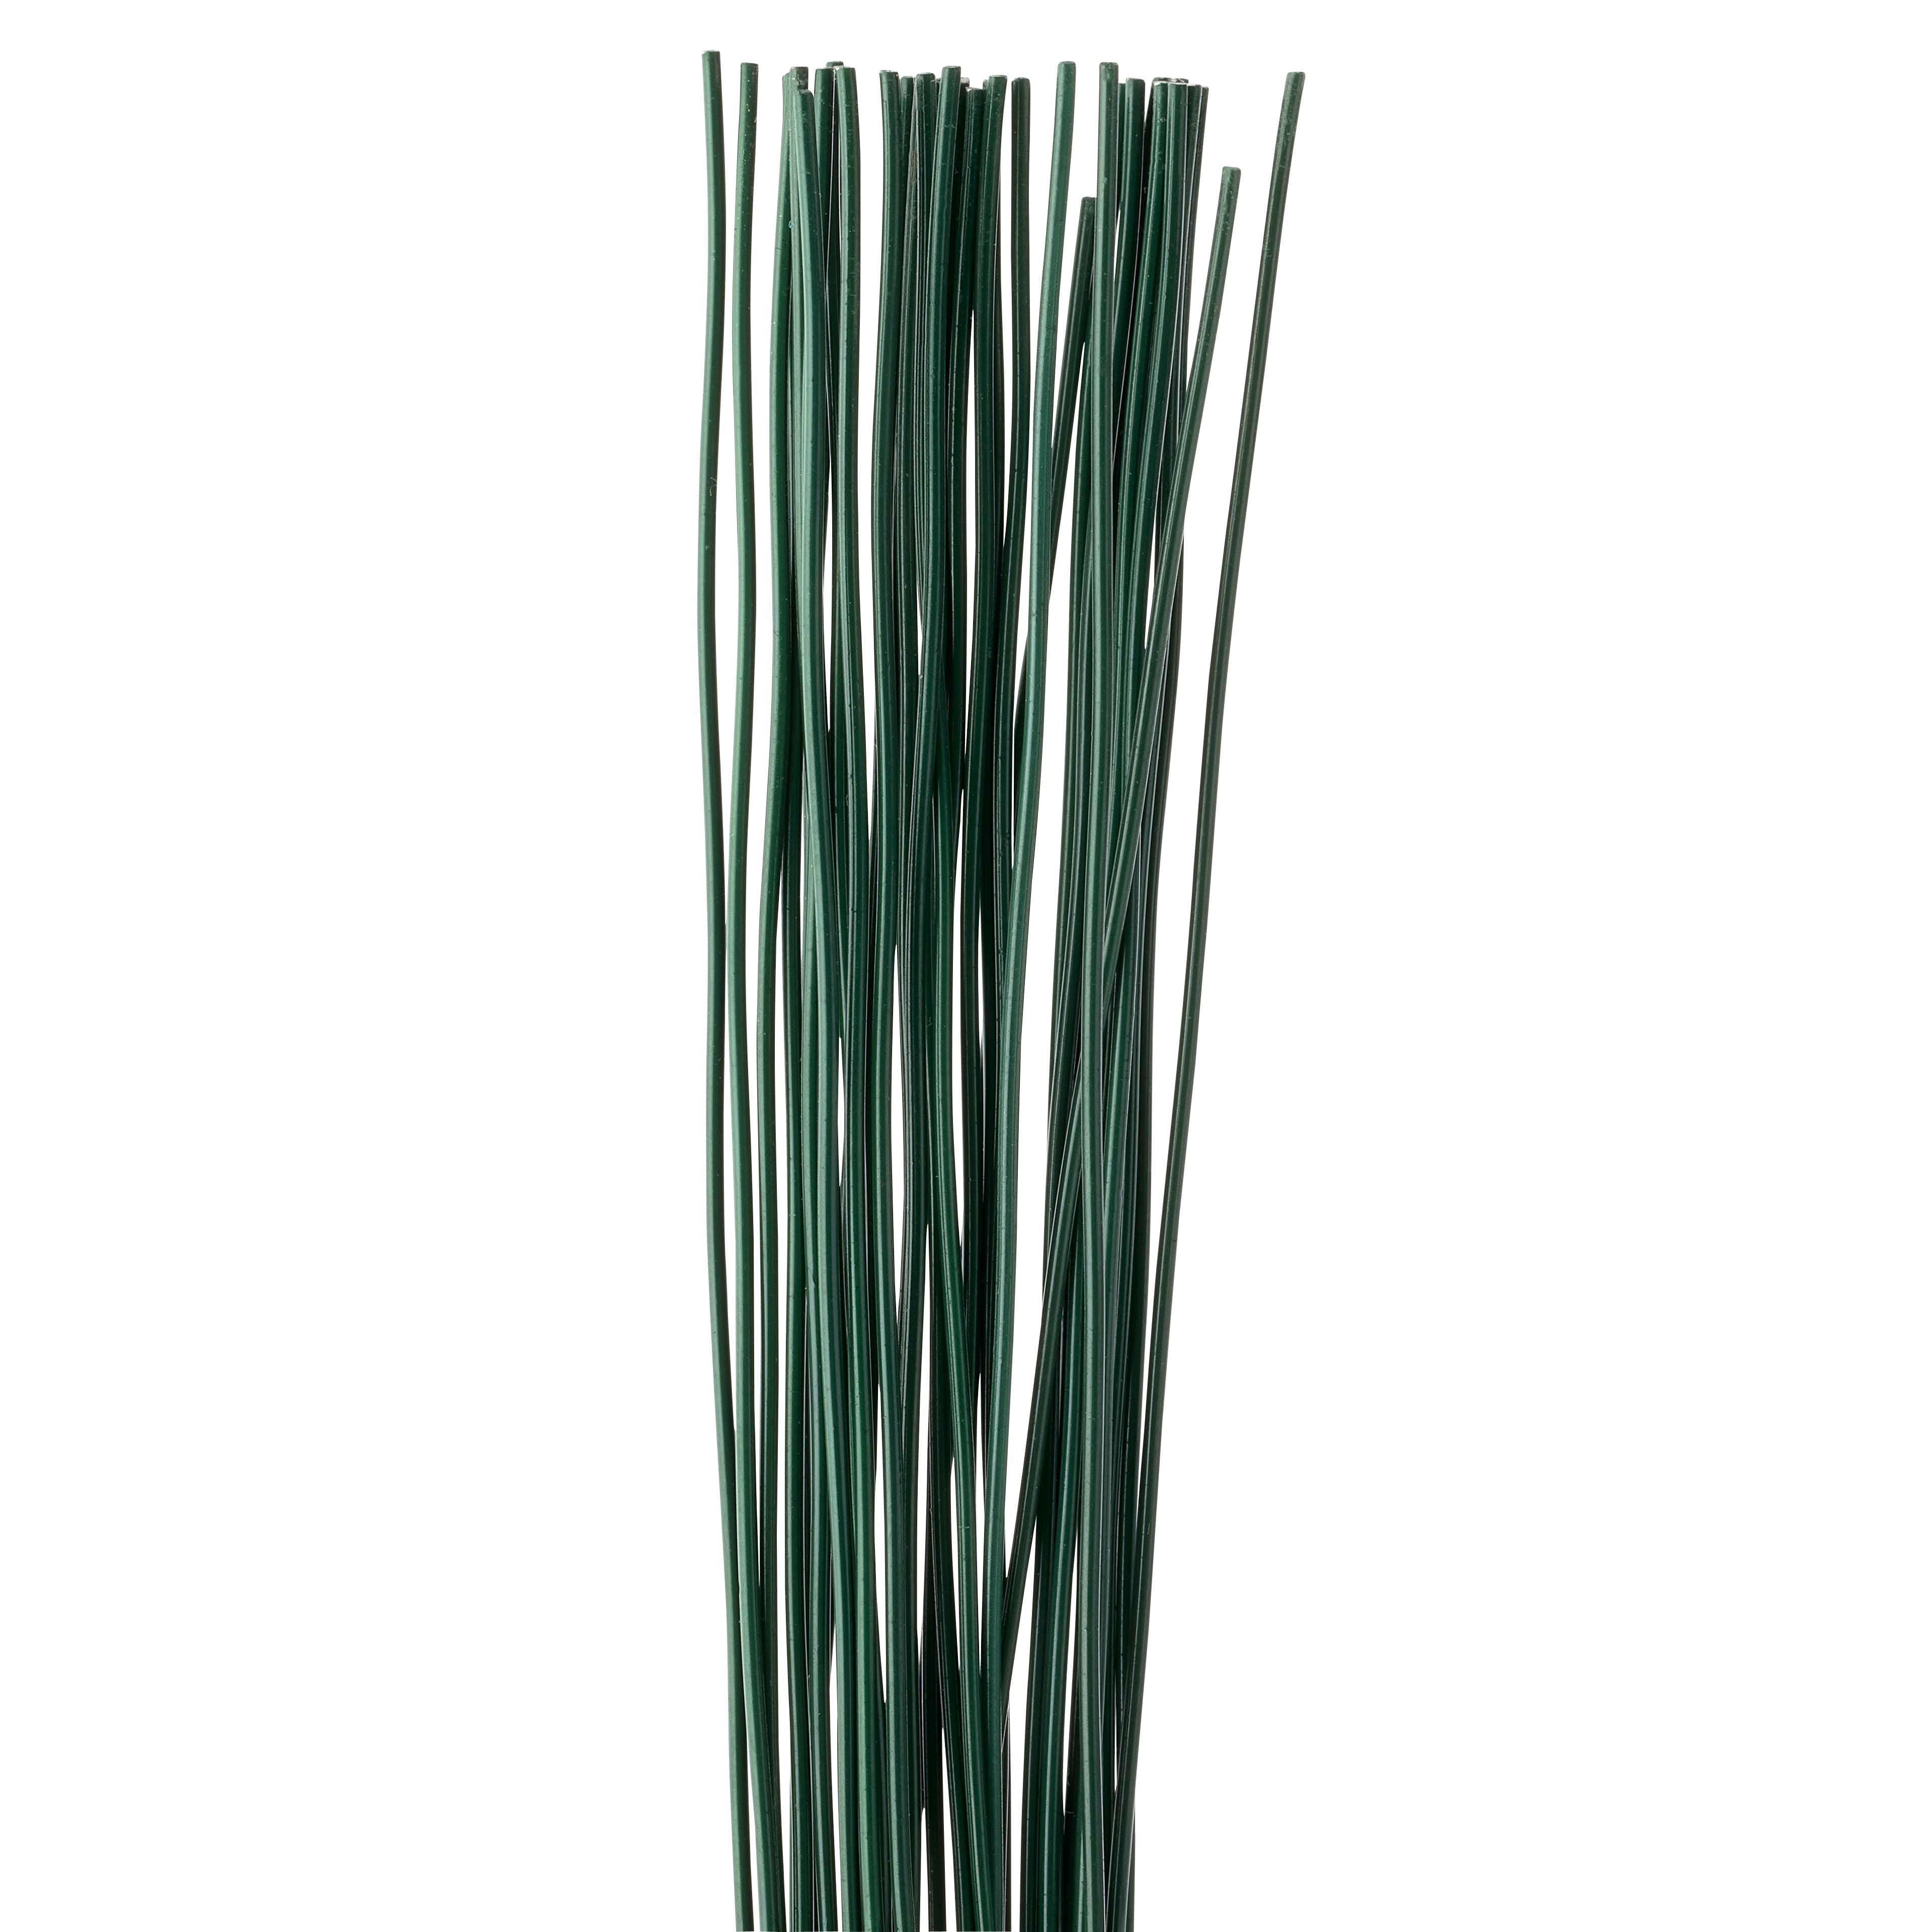 12 Packs: 35 ct. (420 total) 22 Gauge Green Stem Wire by Ashland&#xAE;